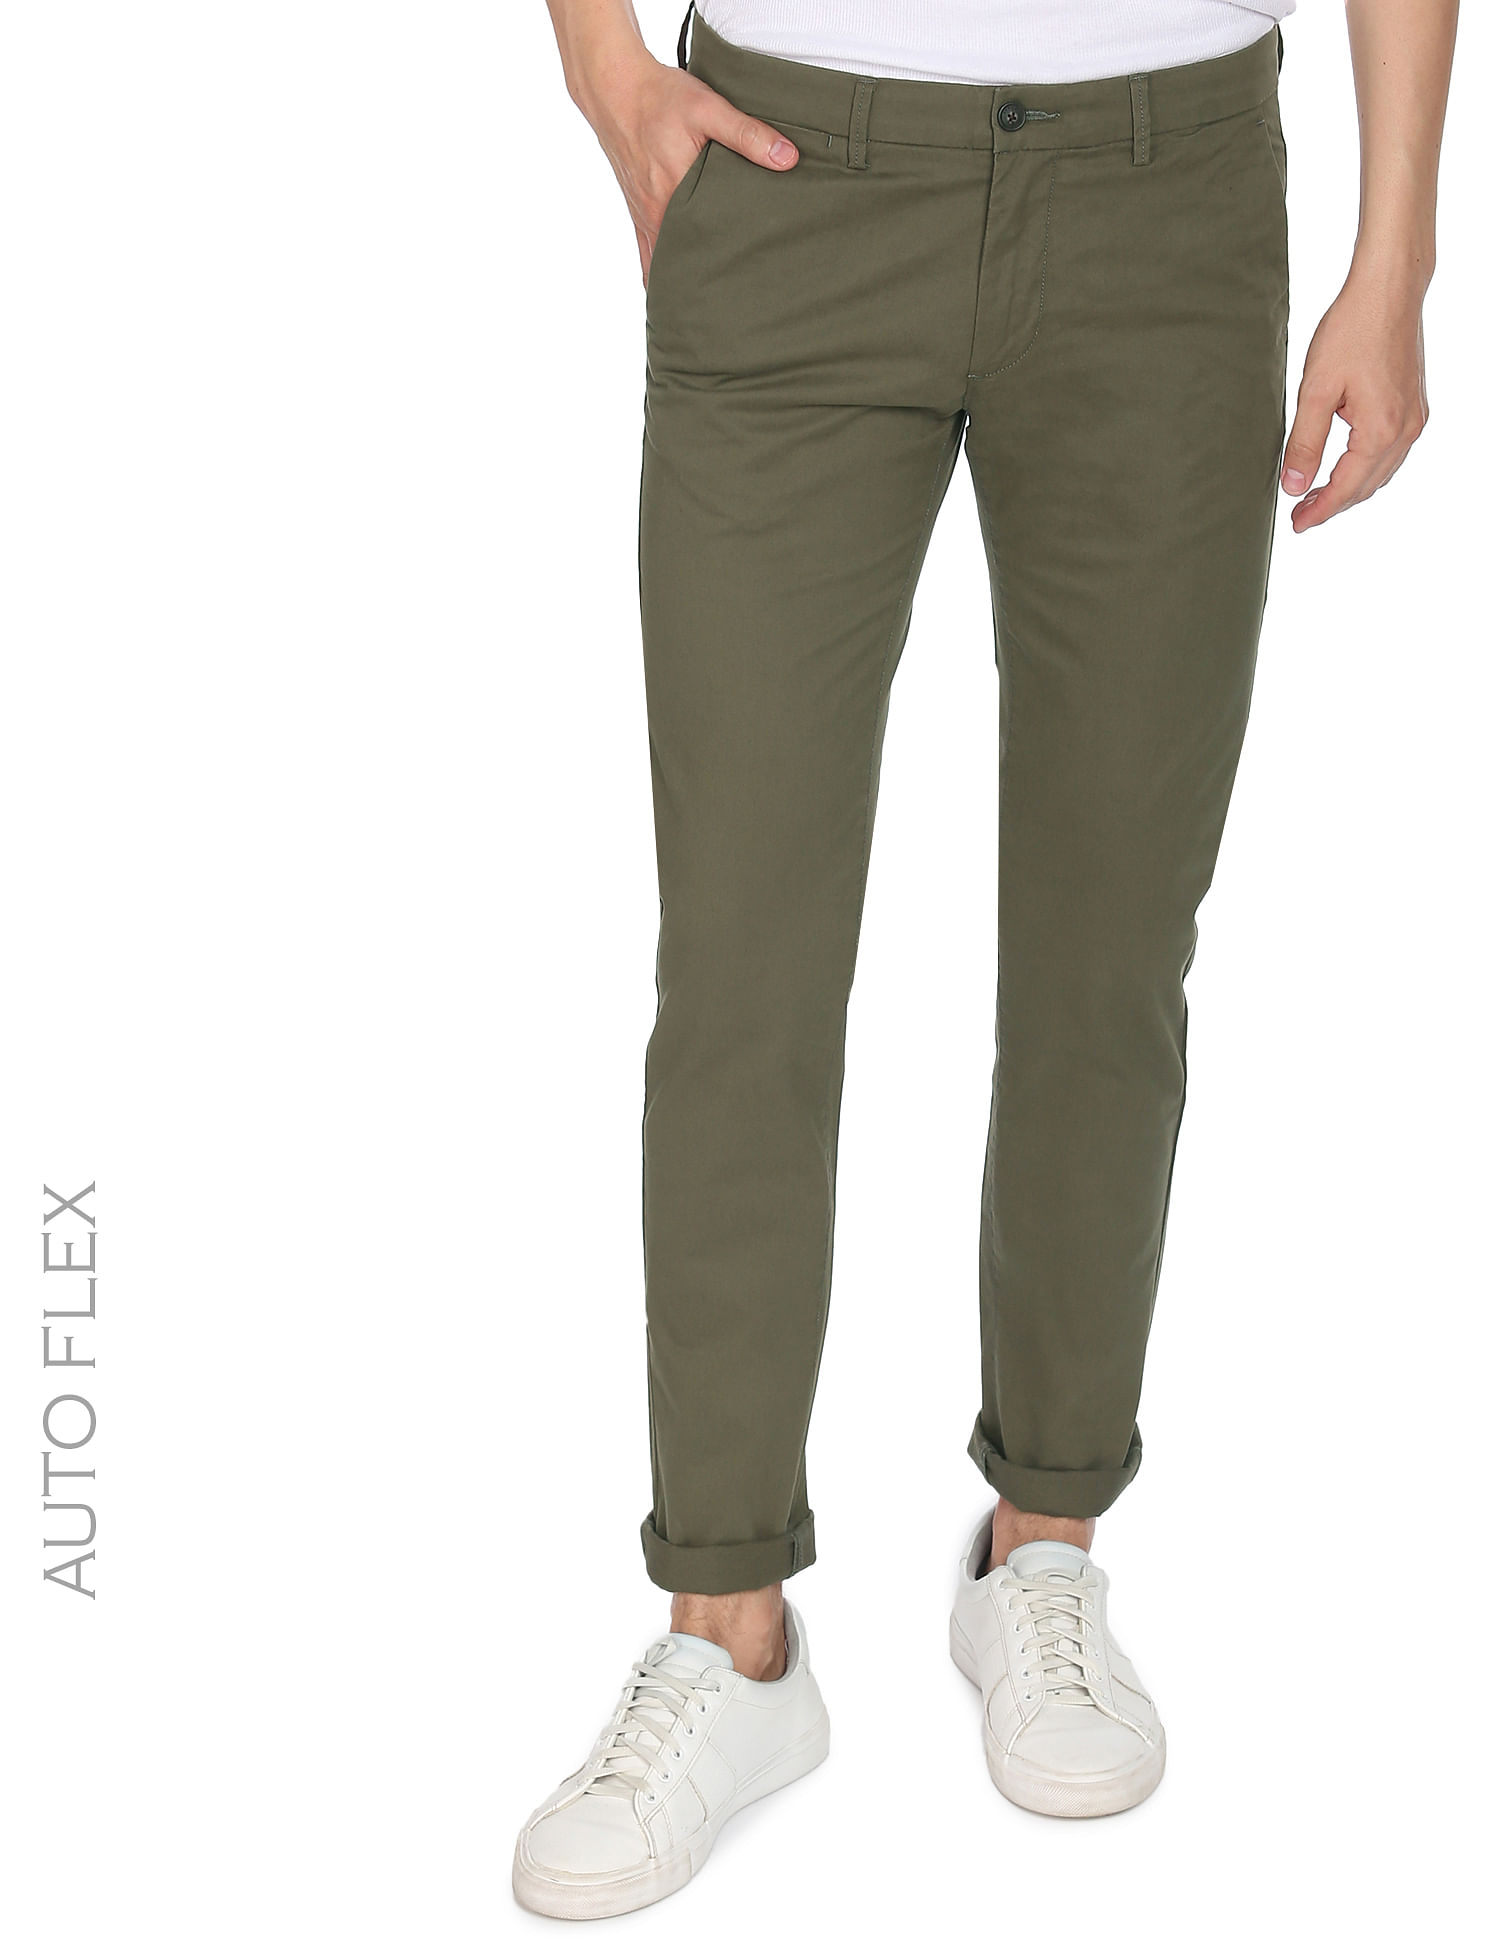 The Deck Trousers - Olive – yarmouthoilskins